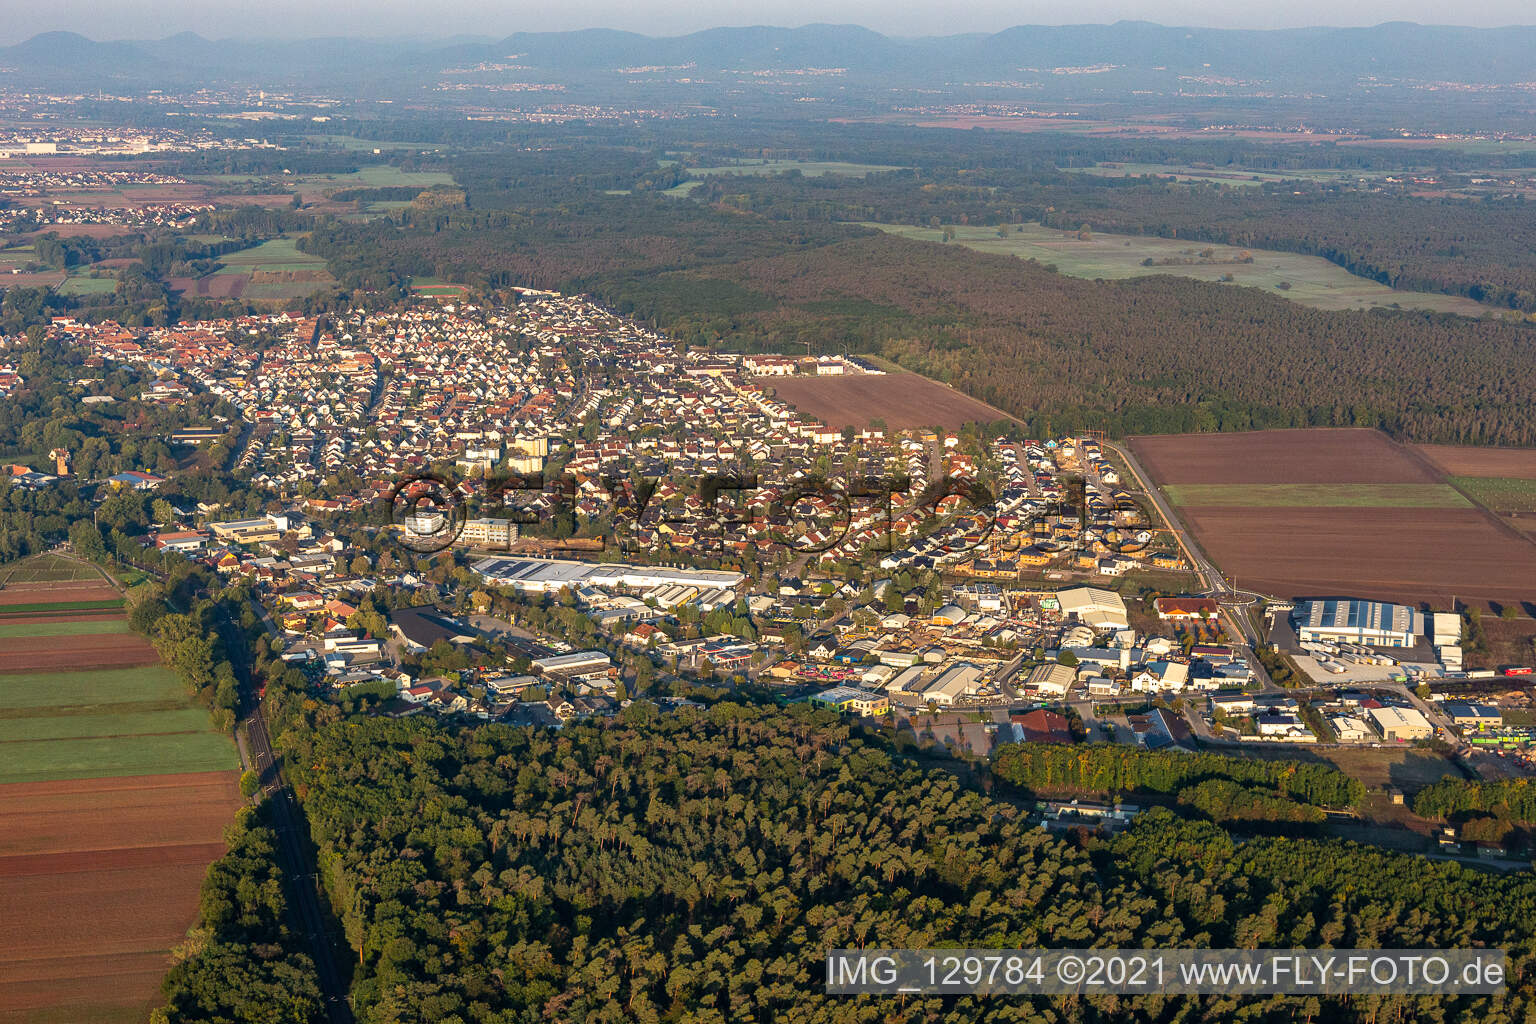 Waldstückring commercial area in Bellheim in the state Rhineland-Palatinate, Germany